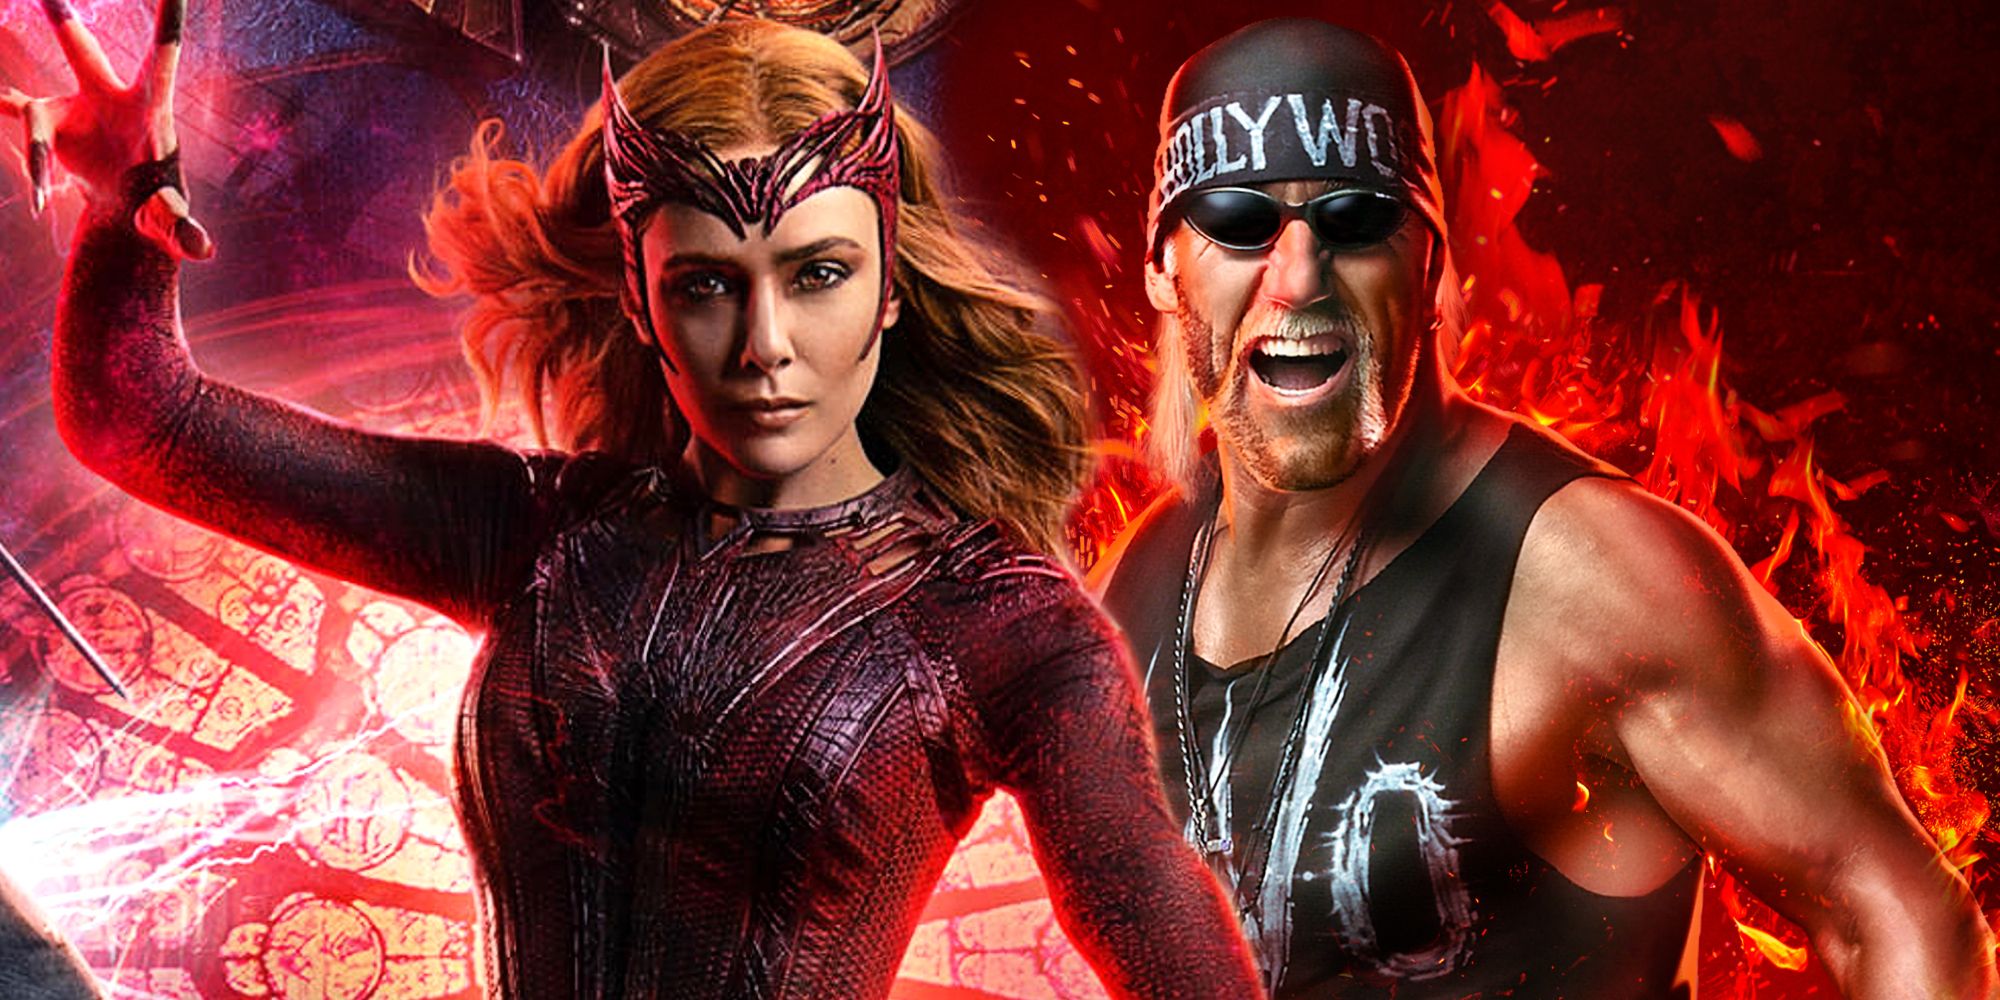 Scarlet Witch in Doctor Strange in the Multiverse of Madness and Hulk Hogan